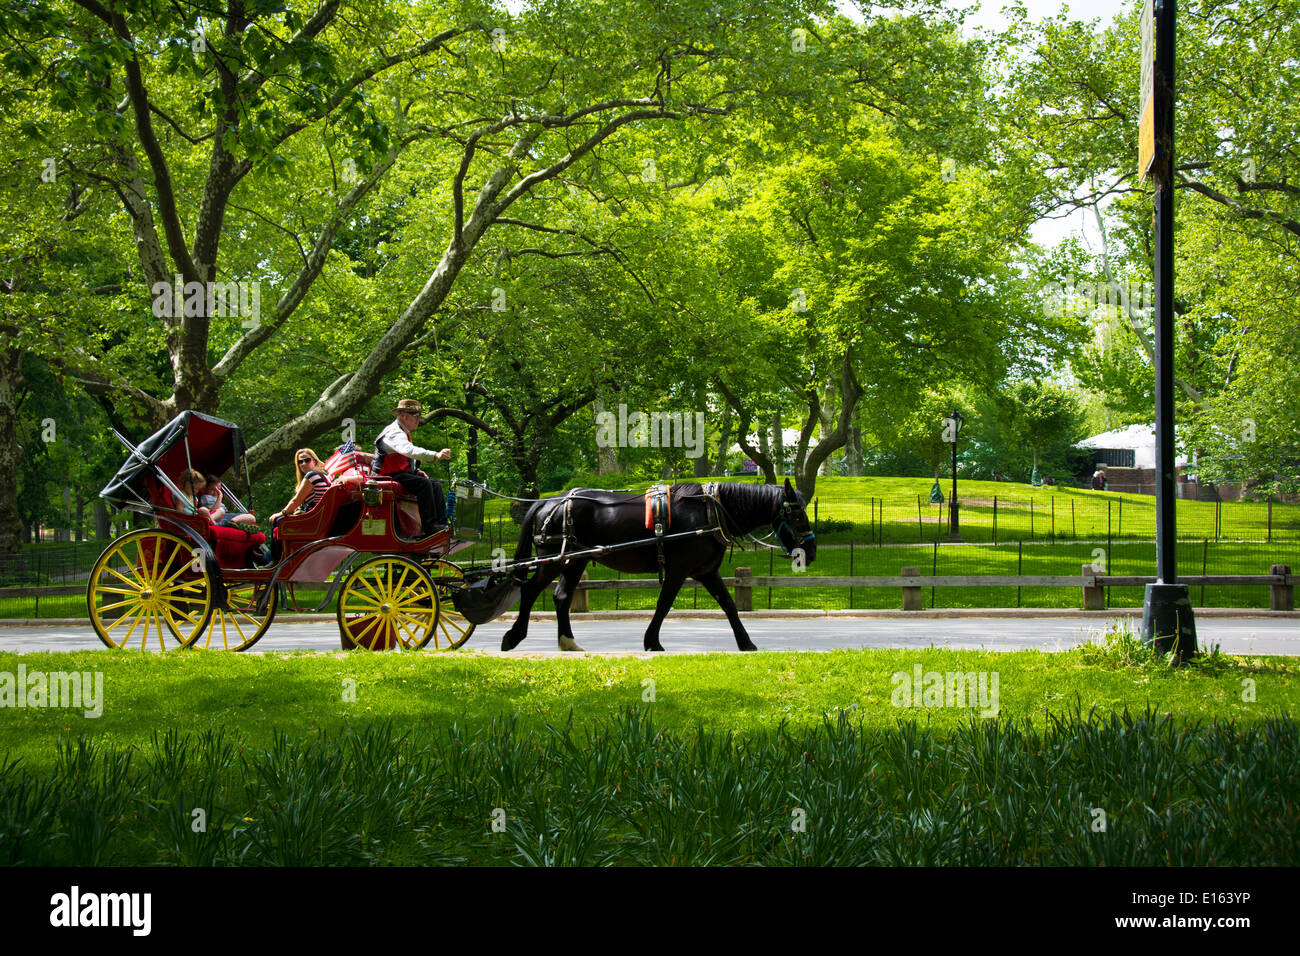 A horse and carriage is a common sight in Central Park, New York city, New York, USA. Stock Photo